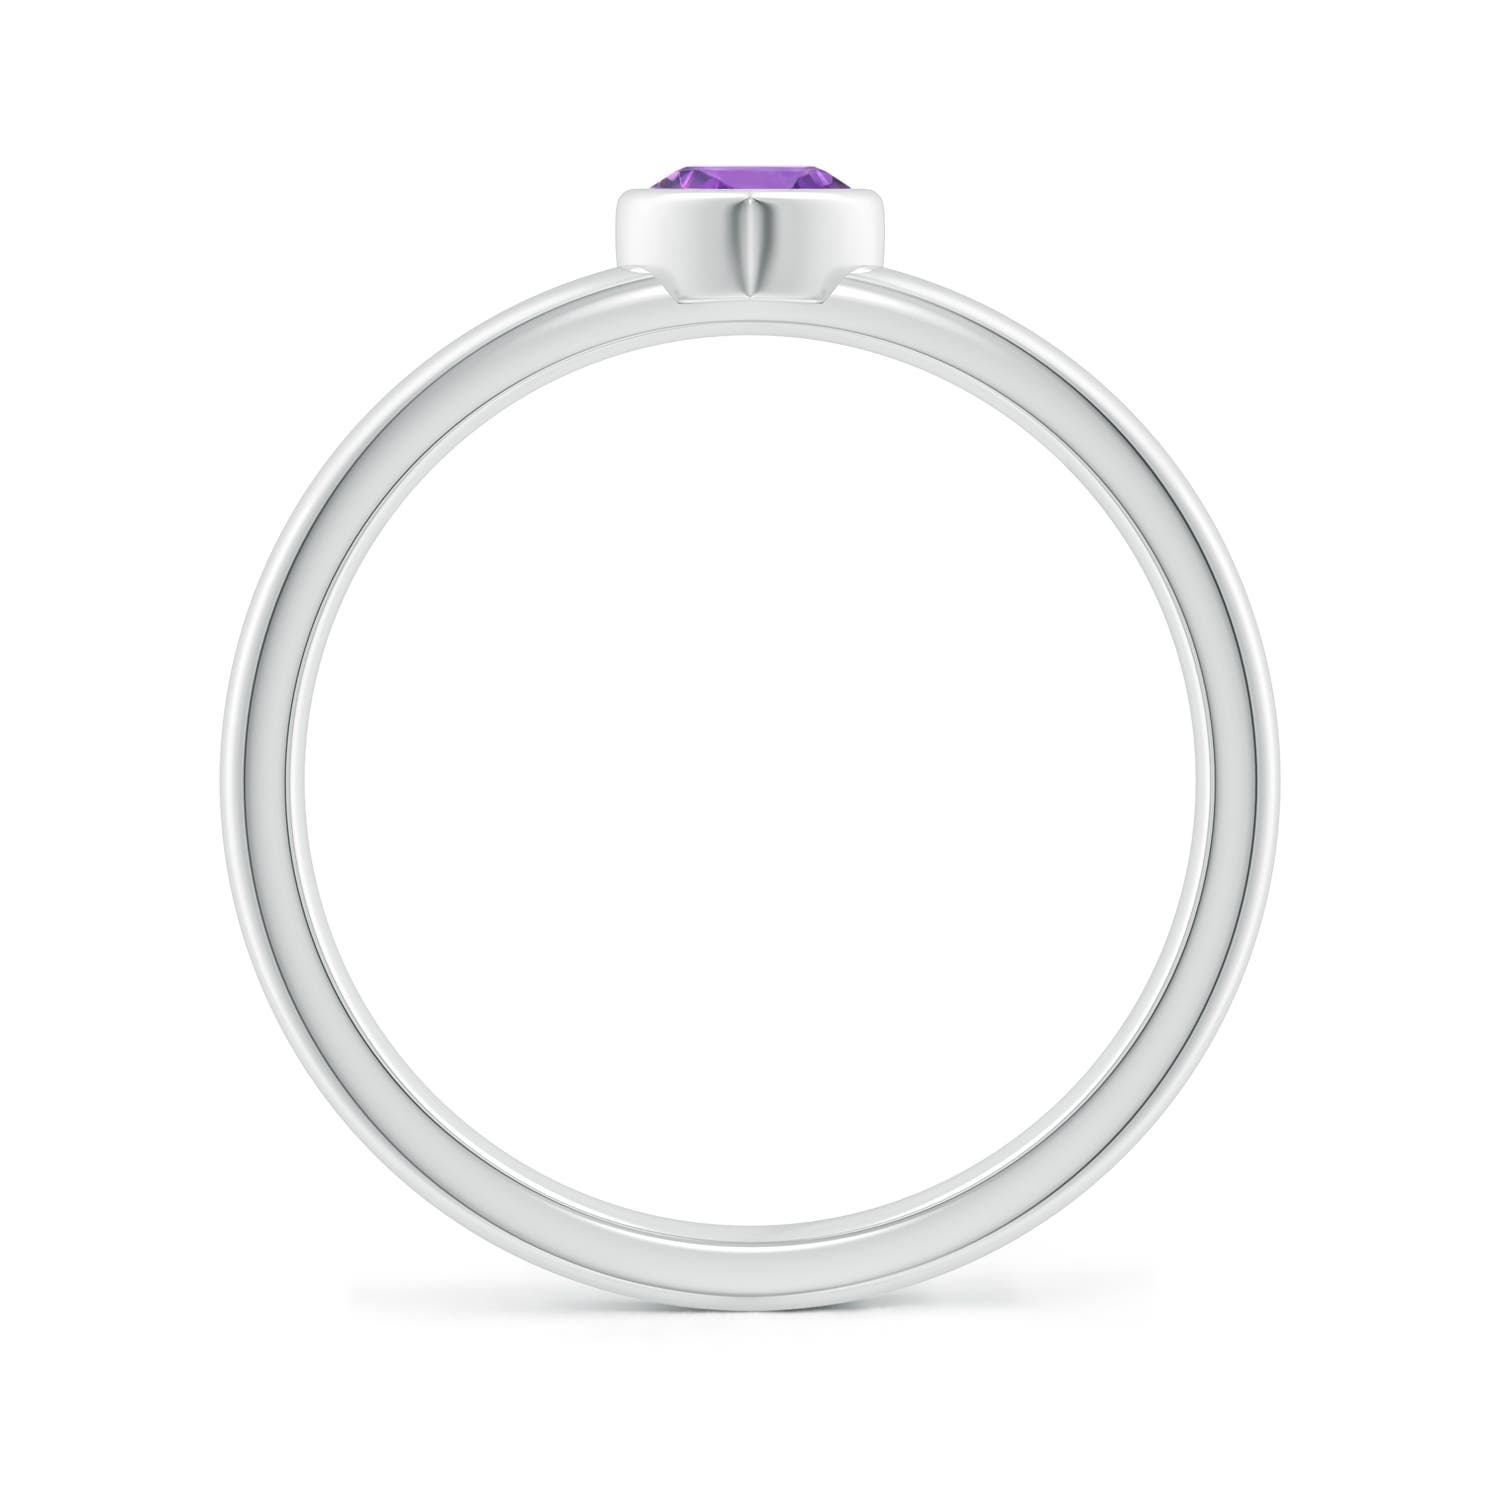 A - Amethyst / 0.2 CT / 14 KT White Gold